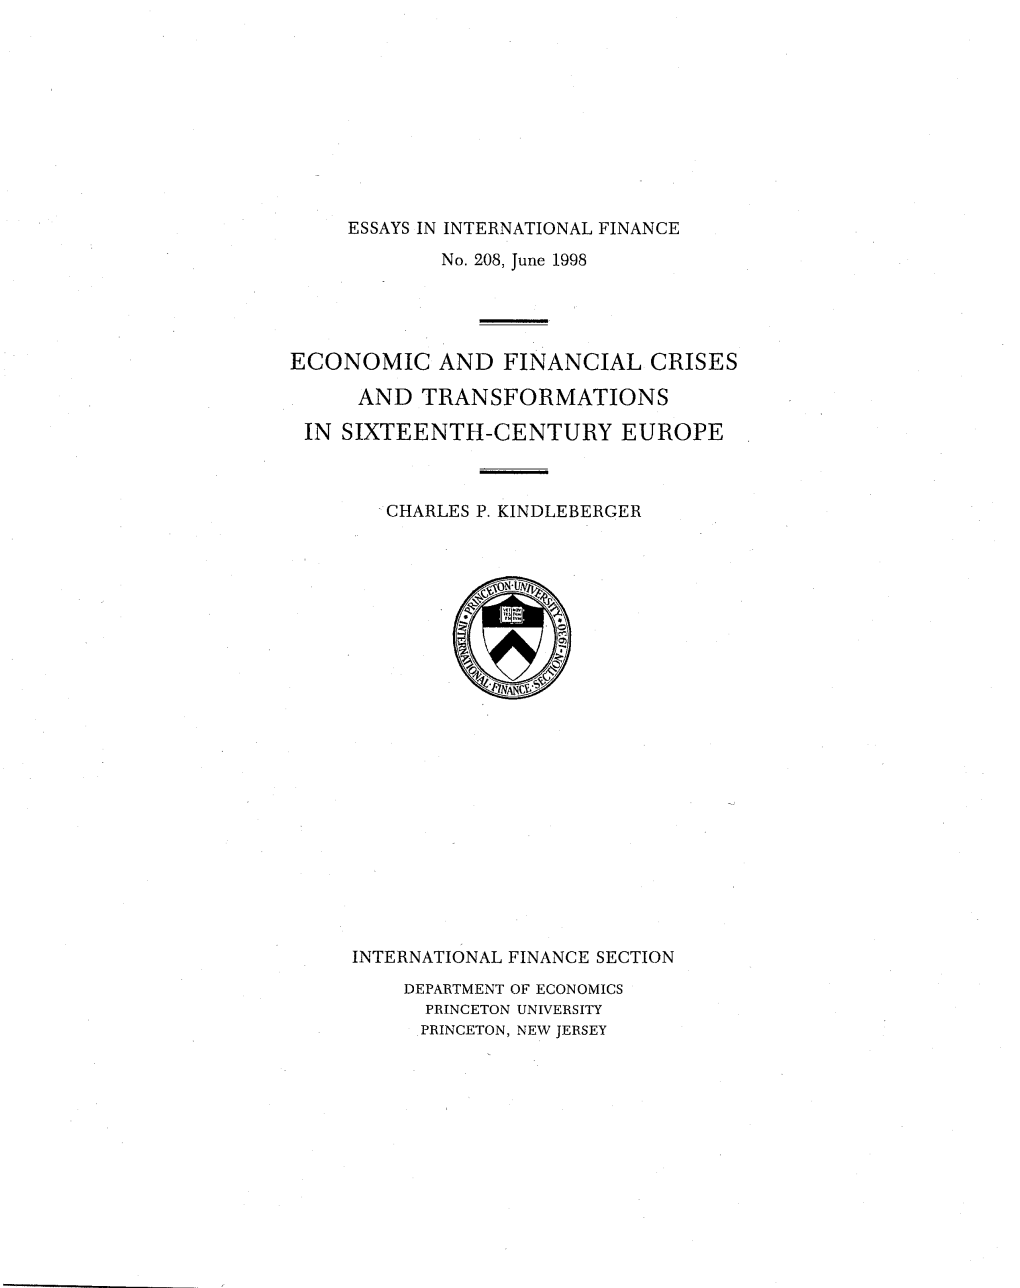 Economic and Financial Crises and Transformations in Sixteenth-Century Europe / Charles P